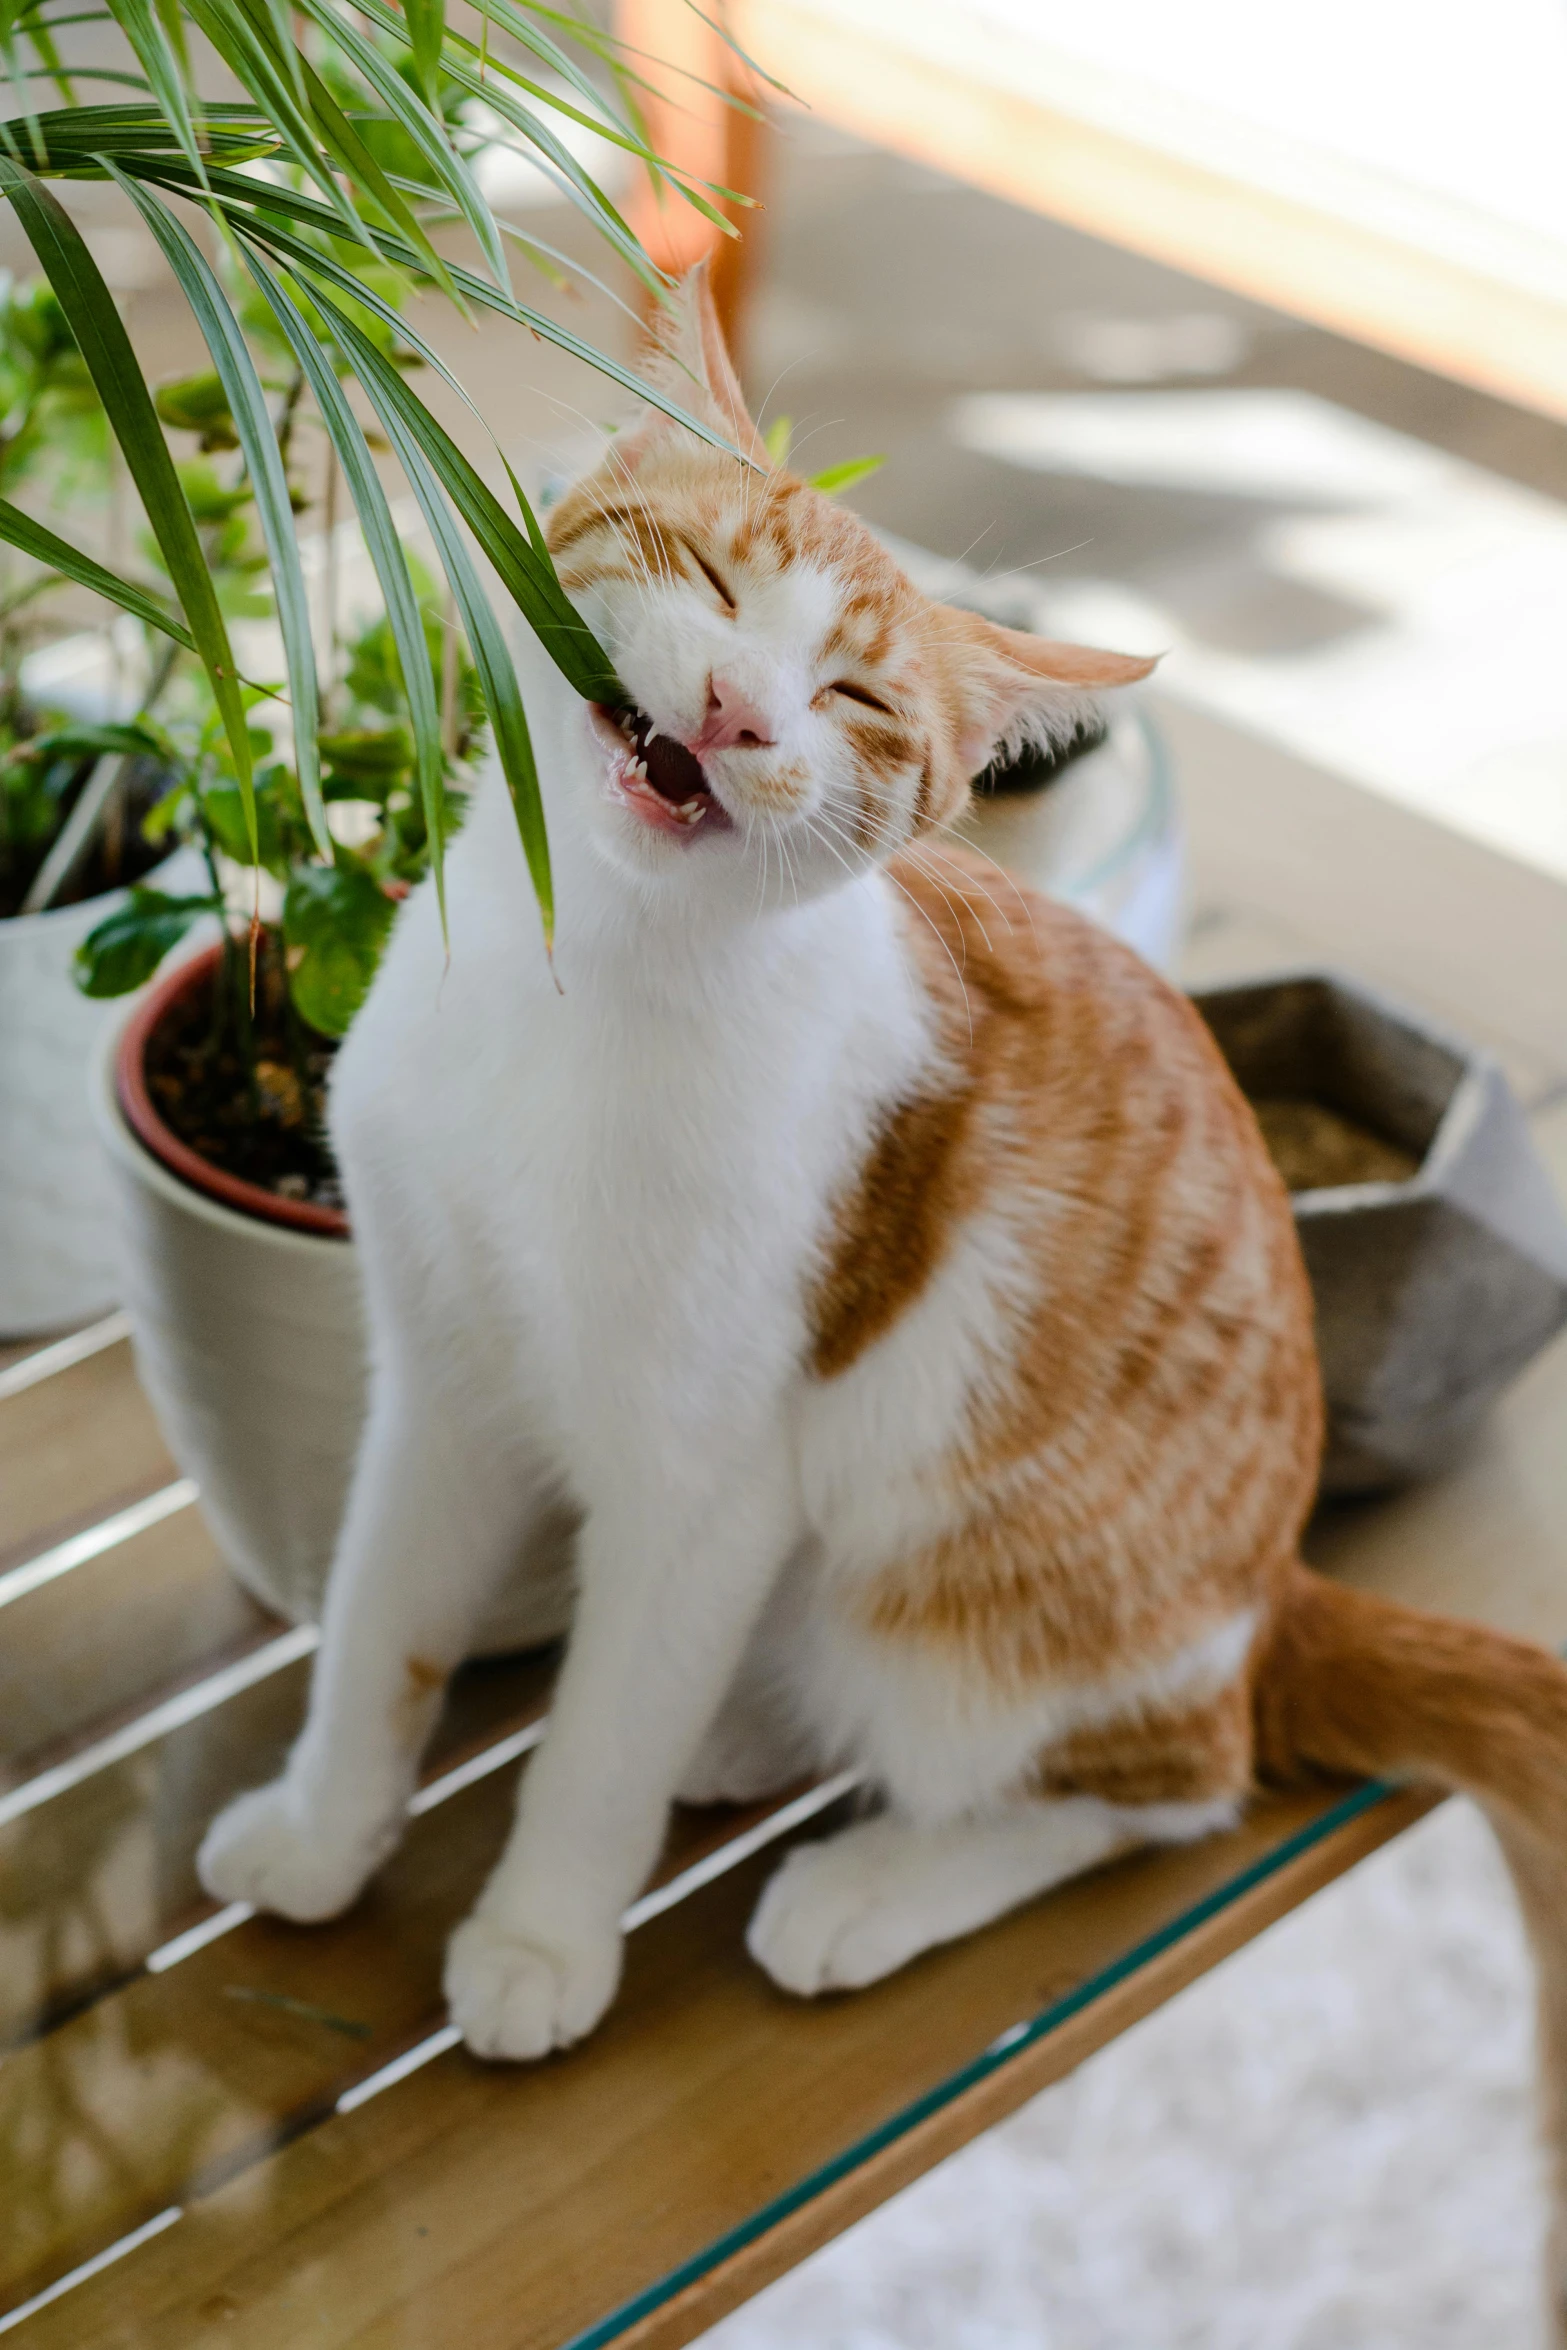 a cat sitting on a wooden bench next to a potted plant, yawning, neck zoomed in, as well as scratches, indoor